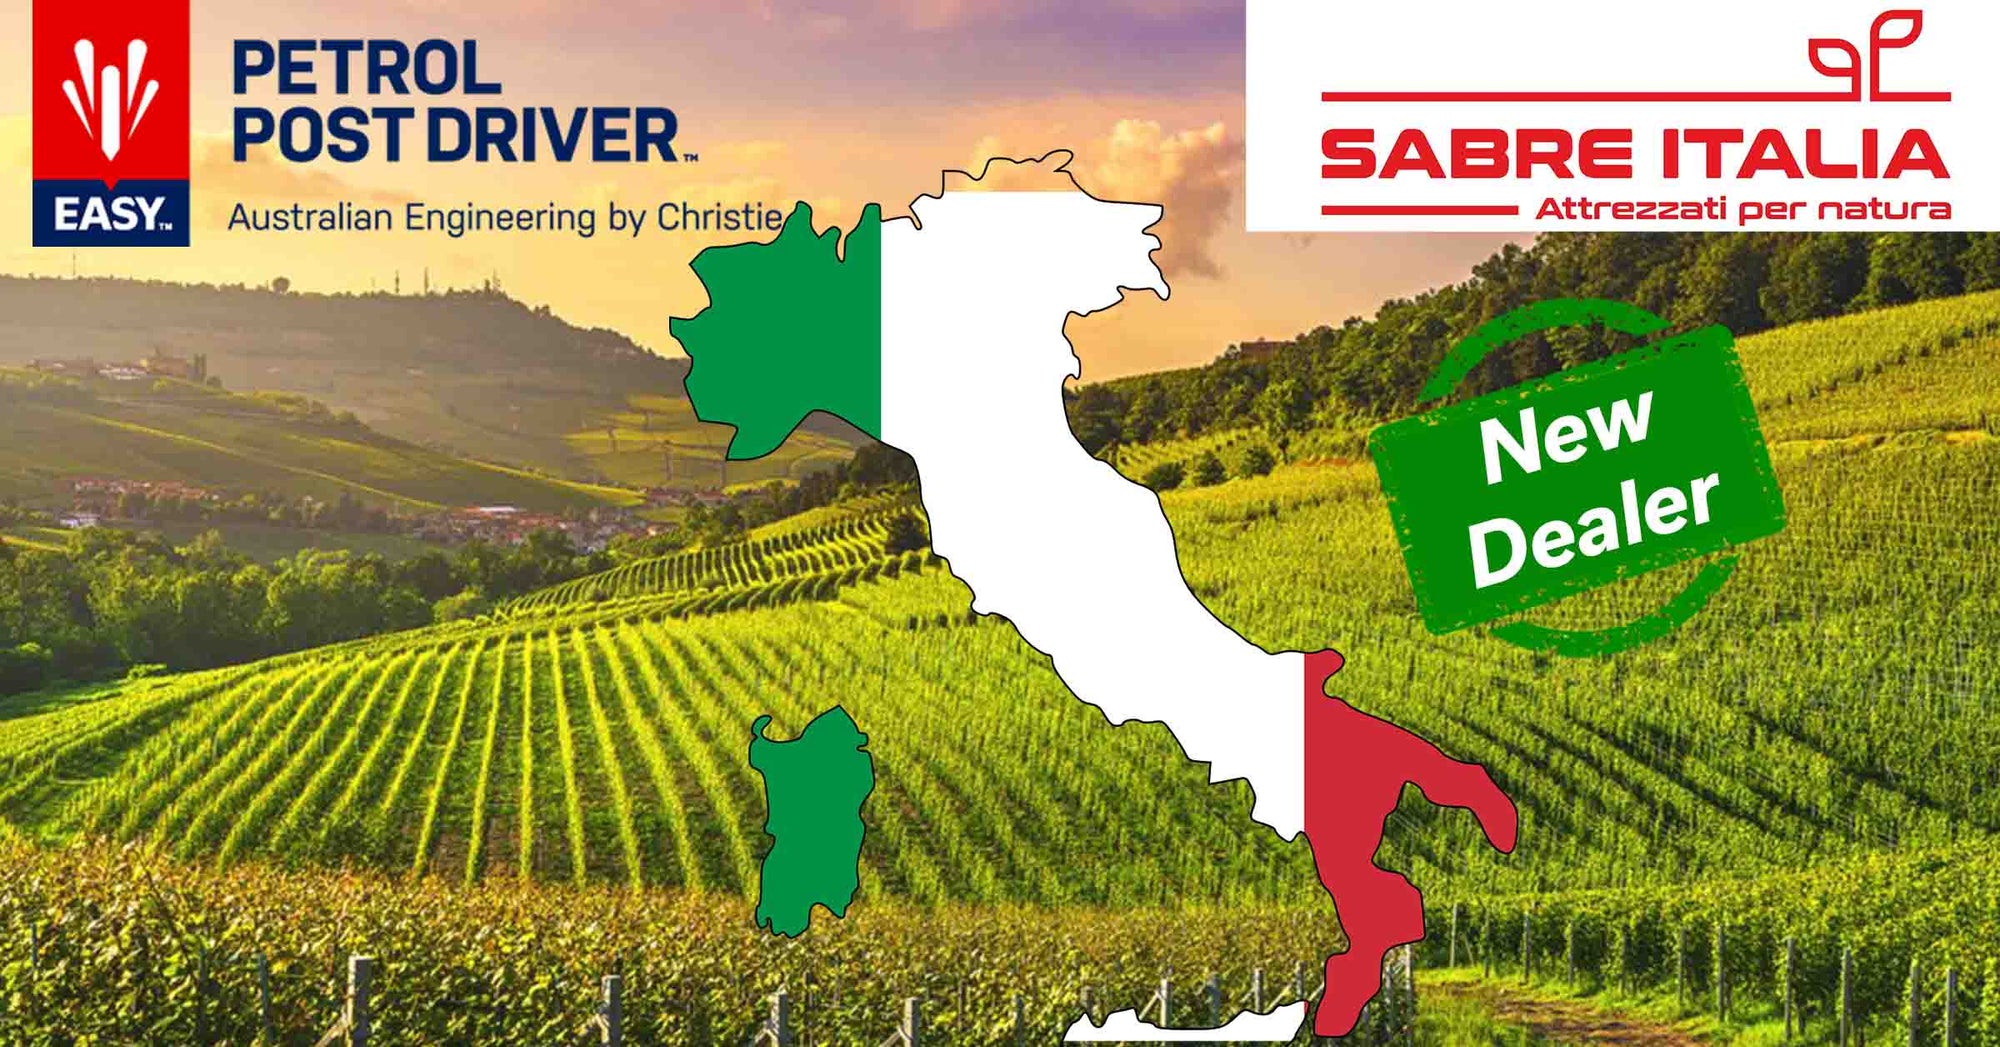 Welcoming Sabre Italia as new dealership in Italy